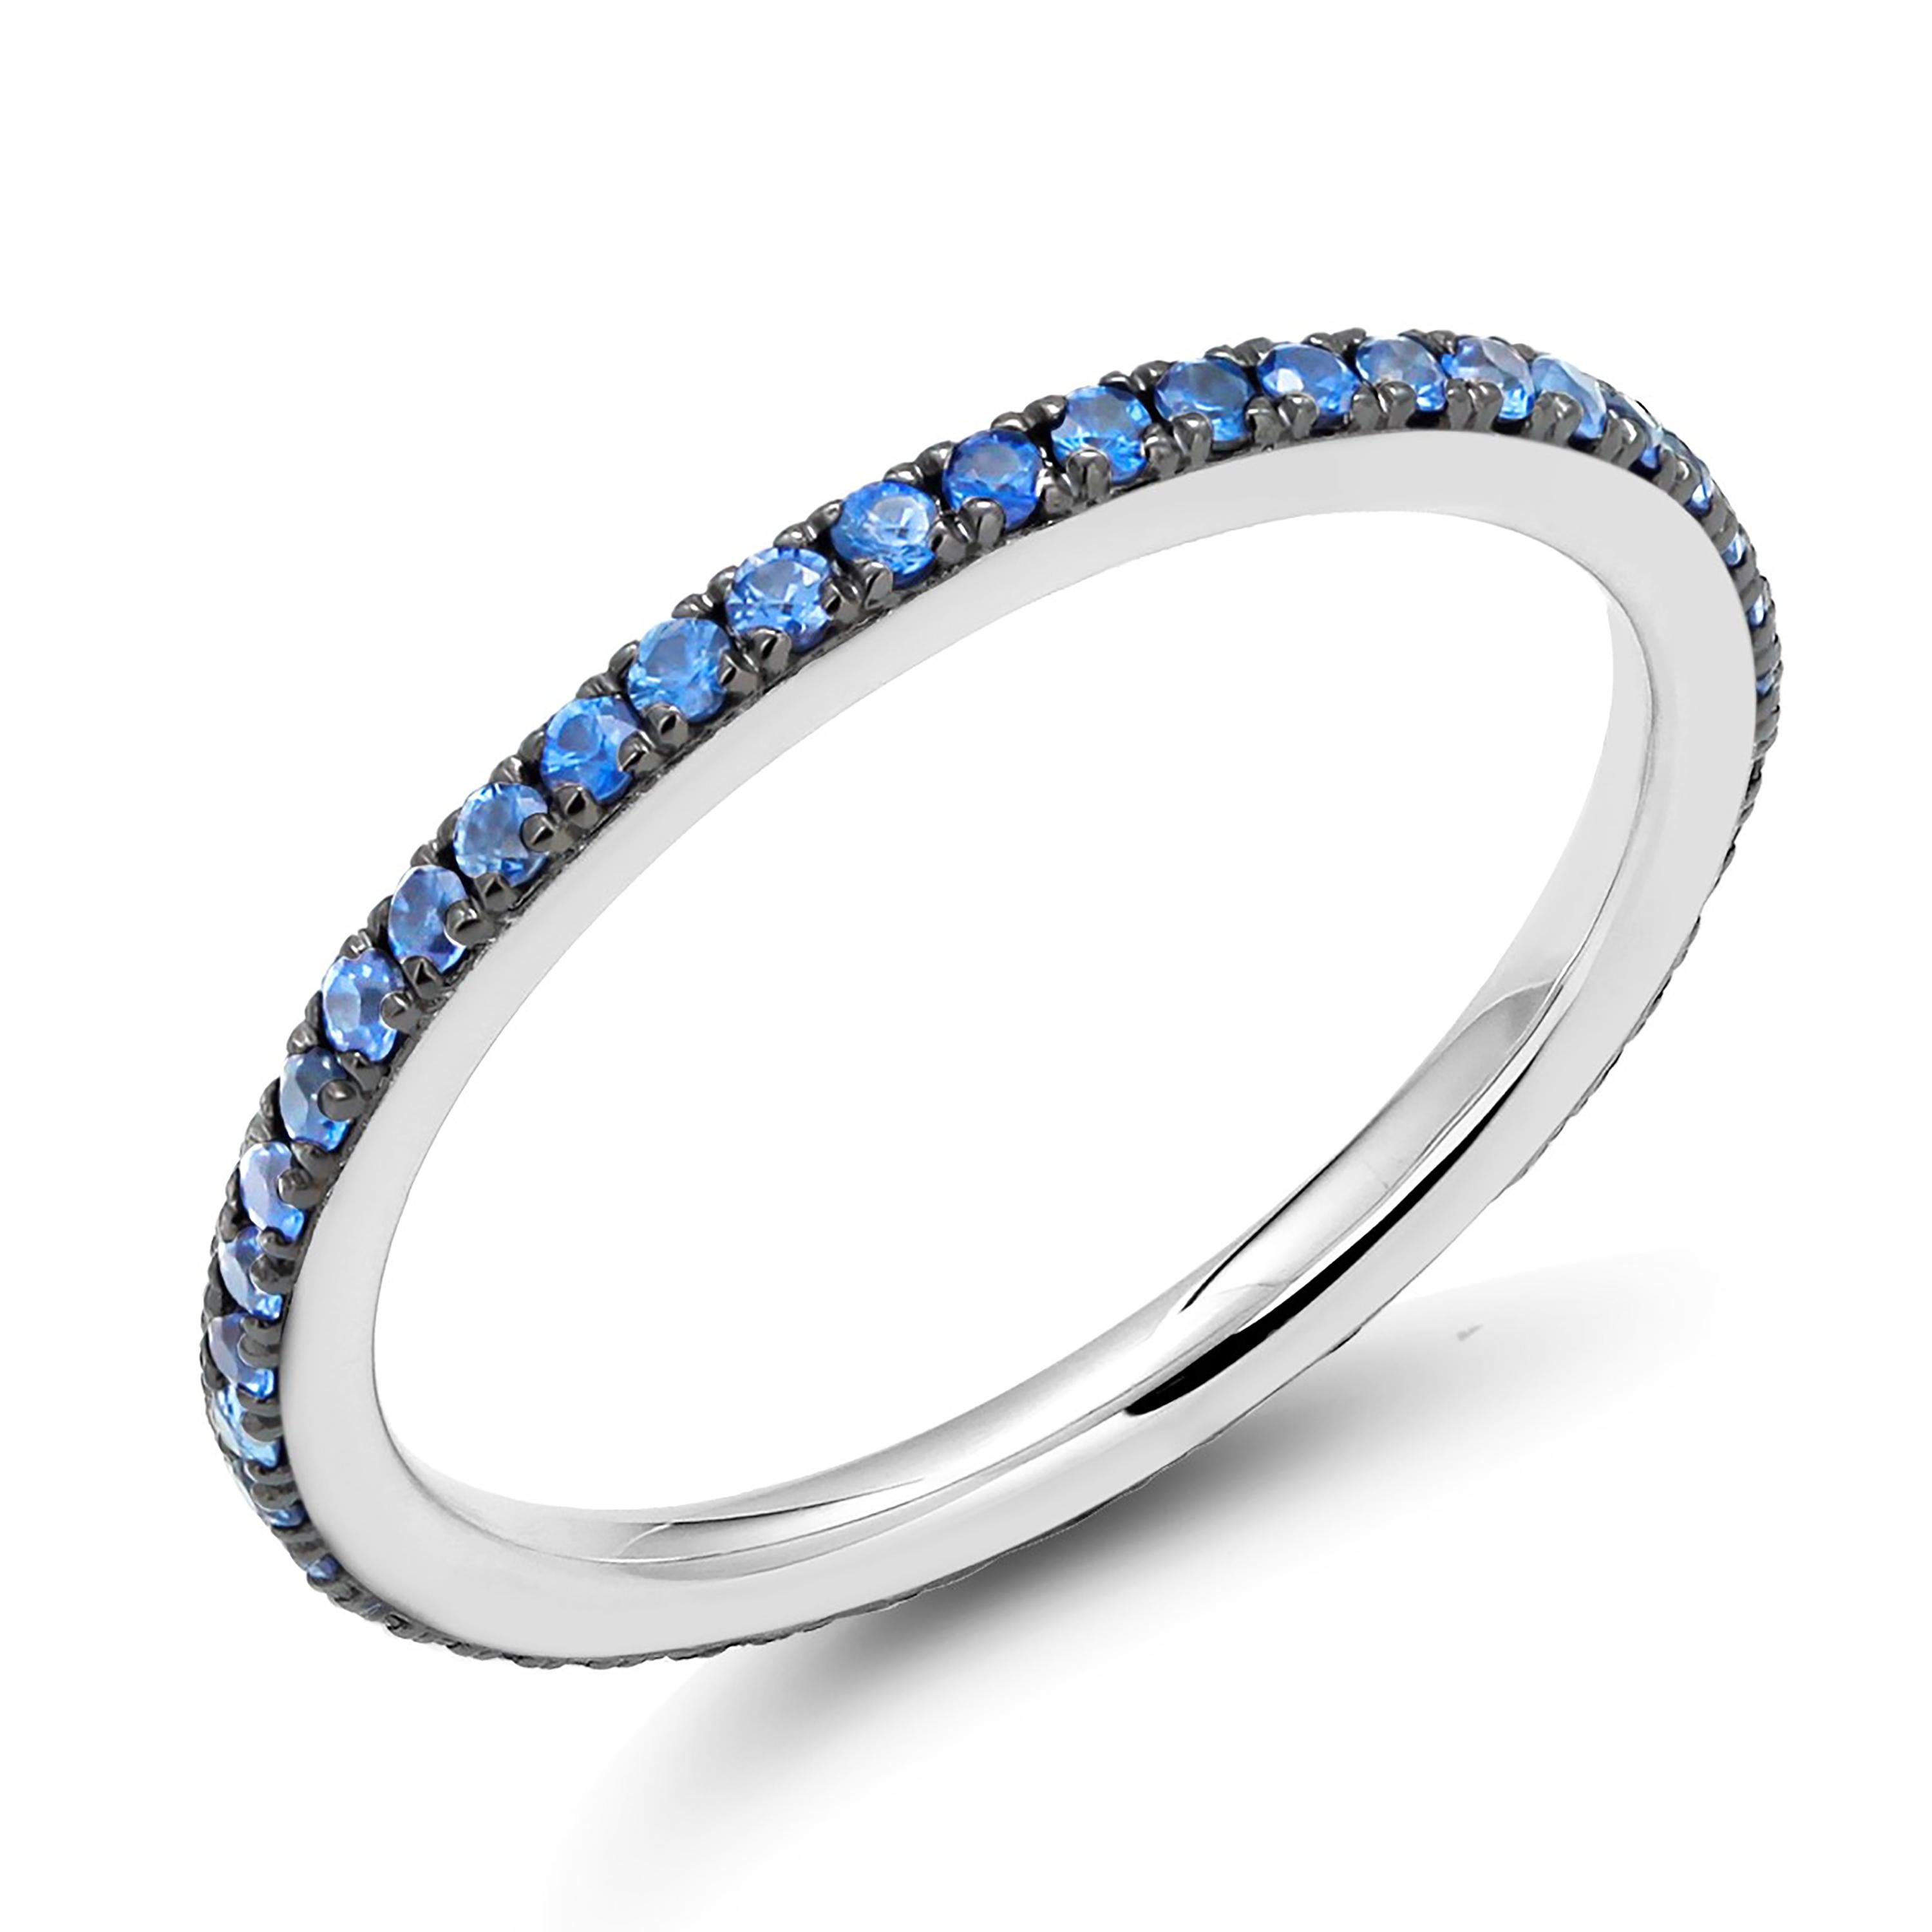 Eighteen karats white gold tiny eternity prong-set stacking band
Sapphires weighing 0.60 carat 
East sapphire measures 1.3 millimeter
The sapphire hue tone color is cobalt blue 
The ring can be worn as an anniversary or stacking band
New Ring
Ring